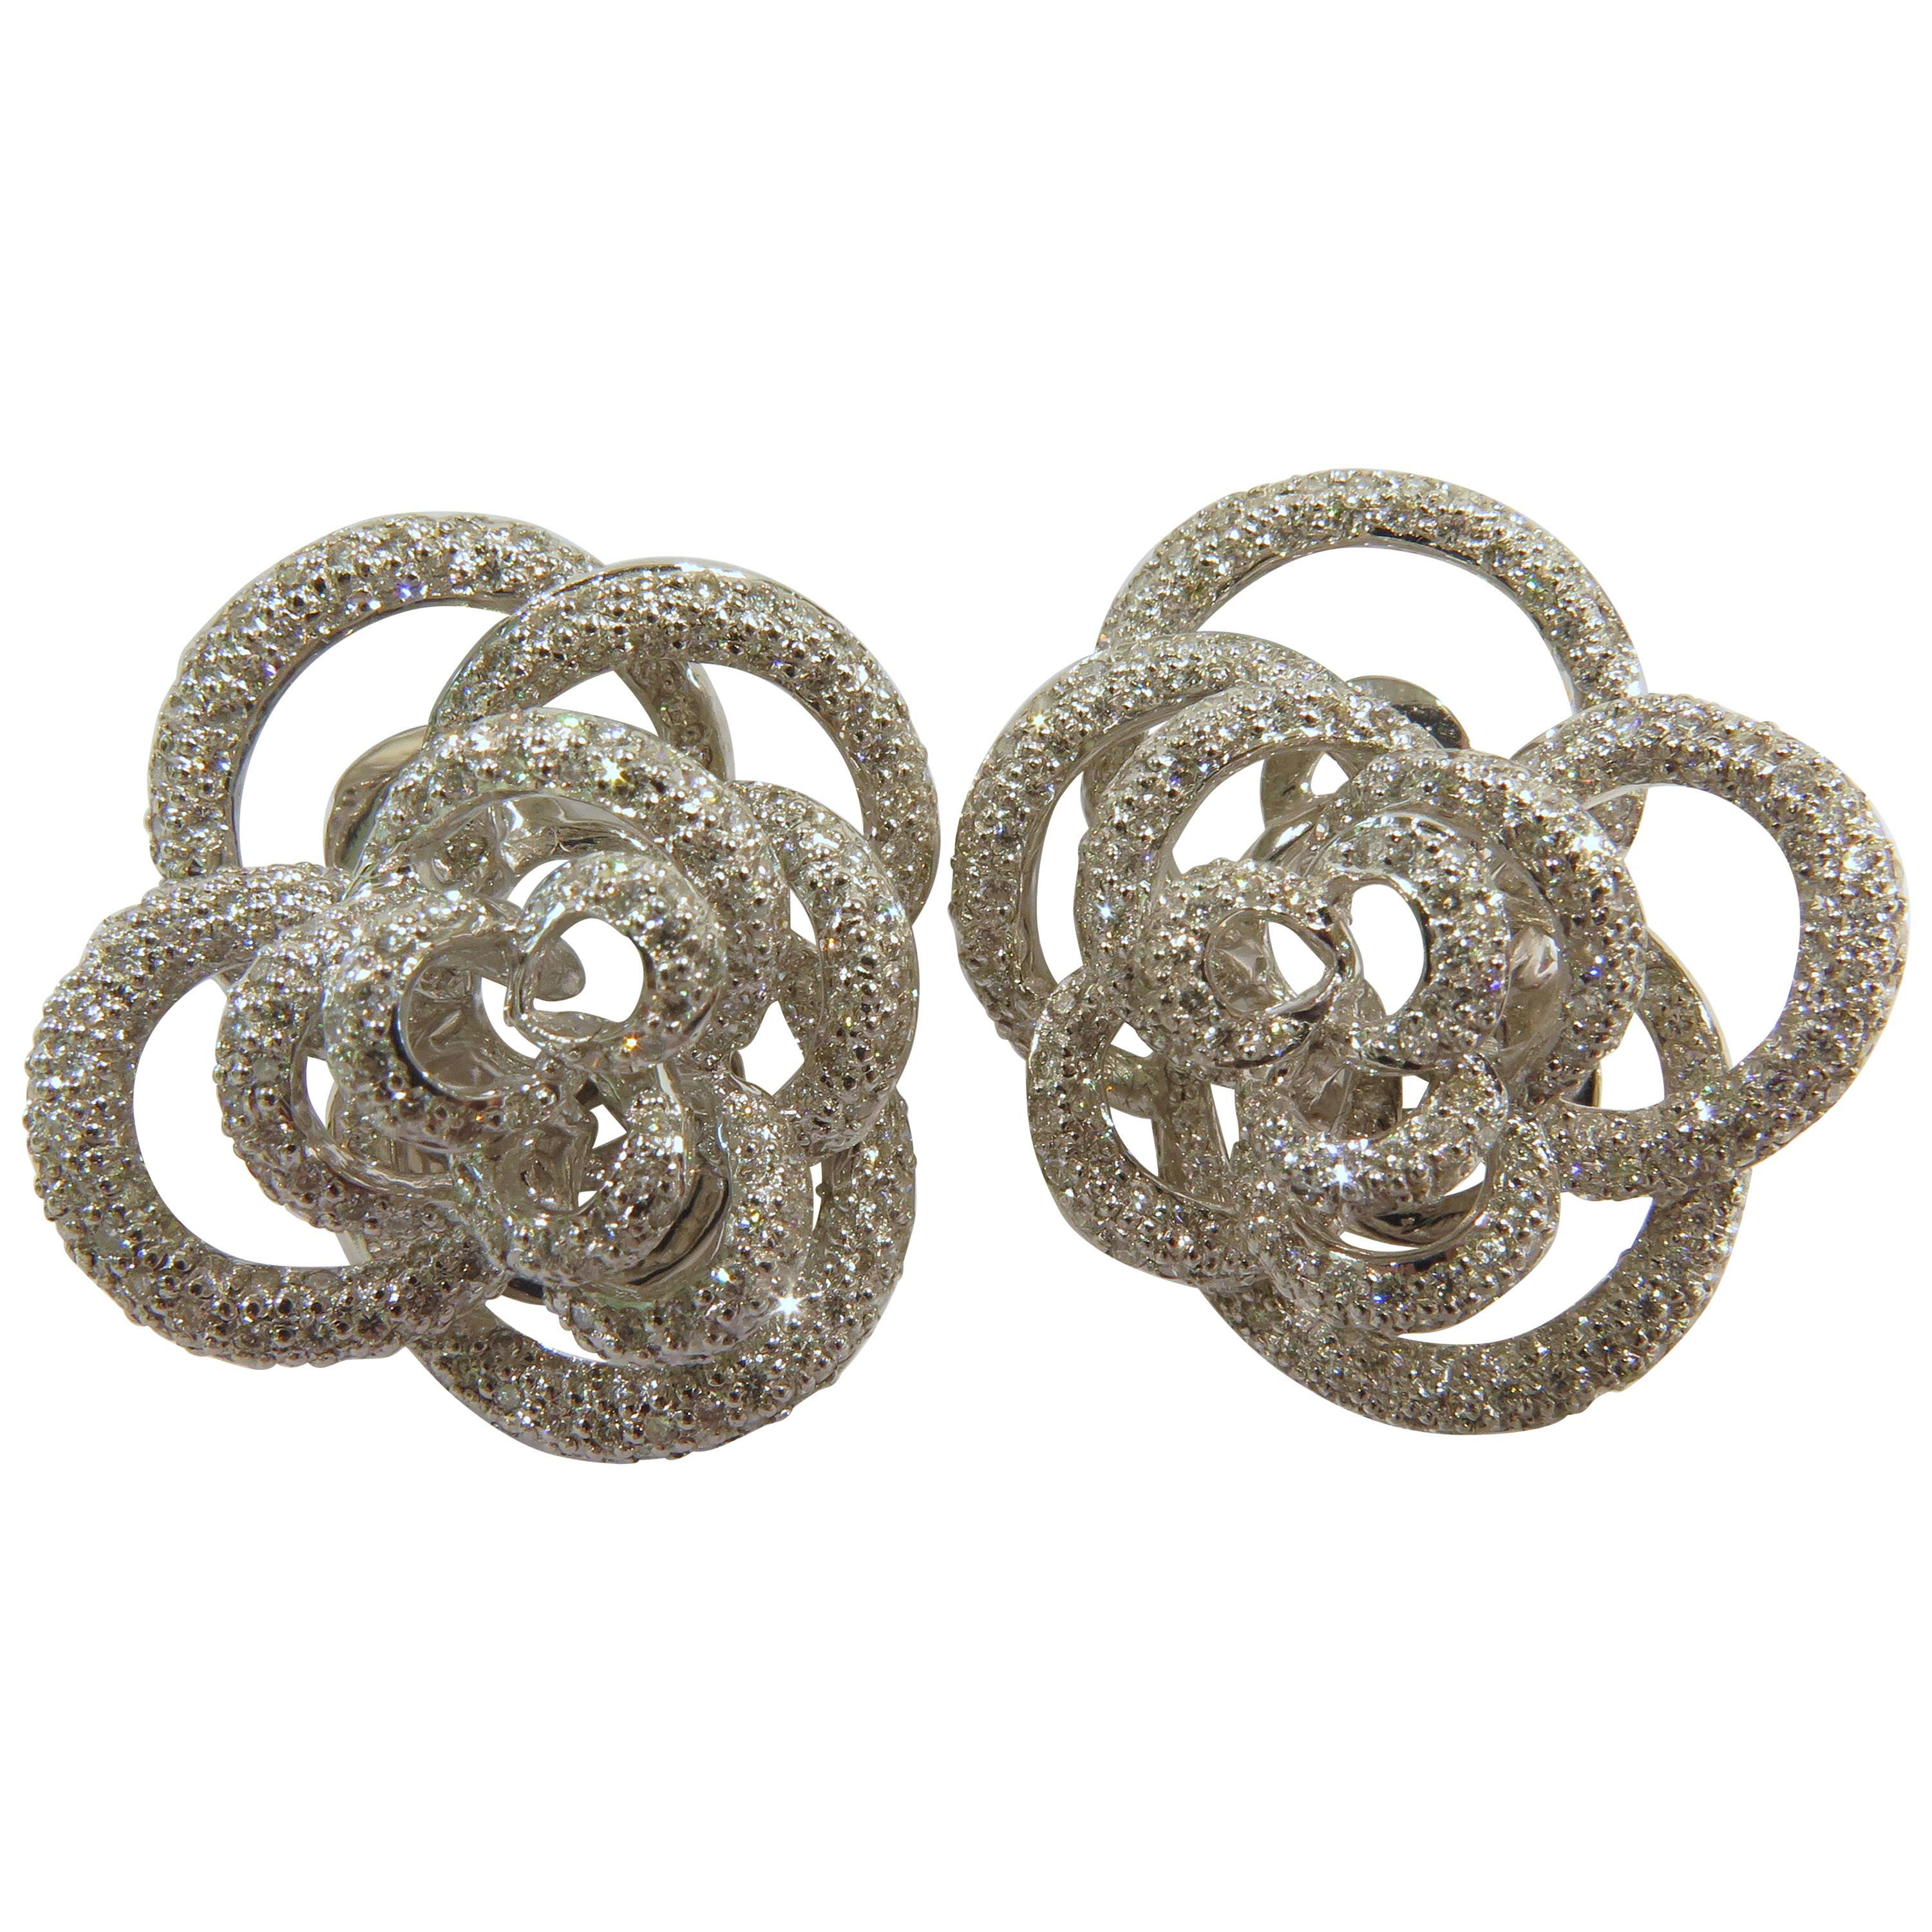 Rose Motif Diamond Gold Earrings with 3 Dimensional Lever Backs